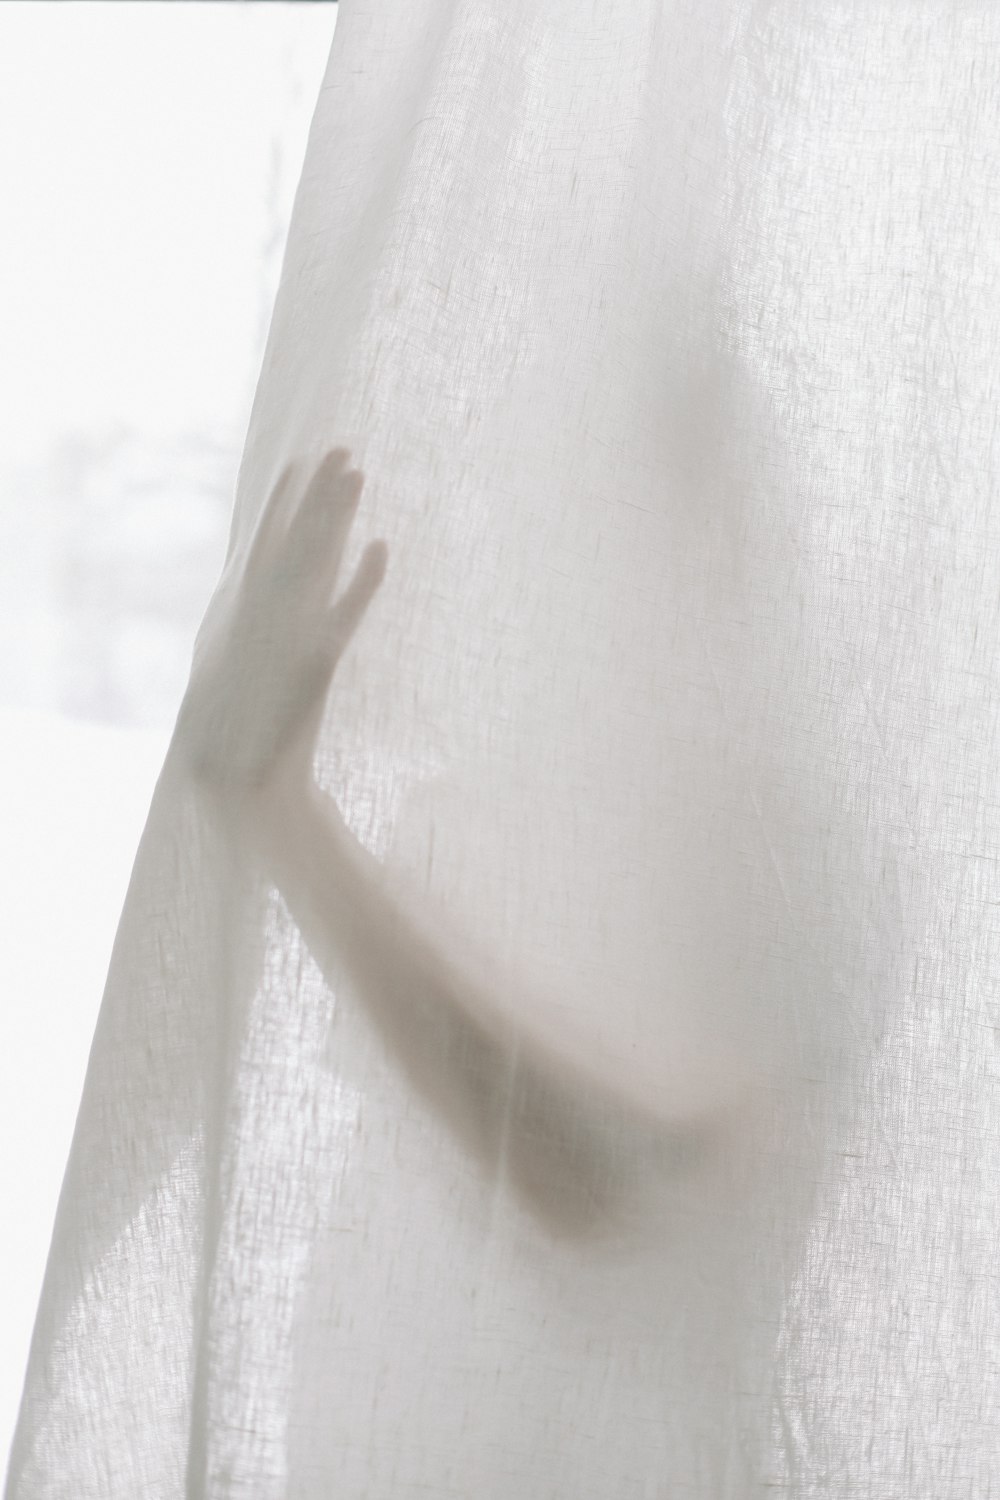 a person's hand coming out of a curtain